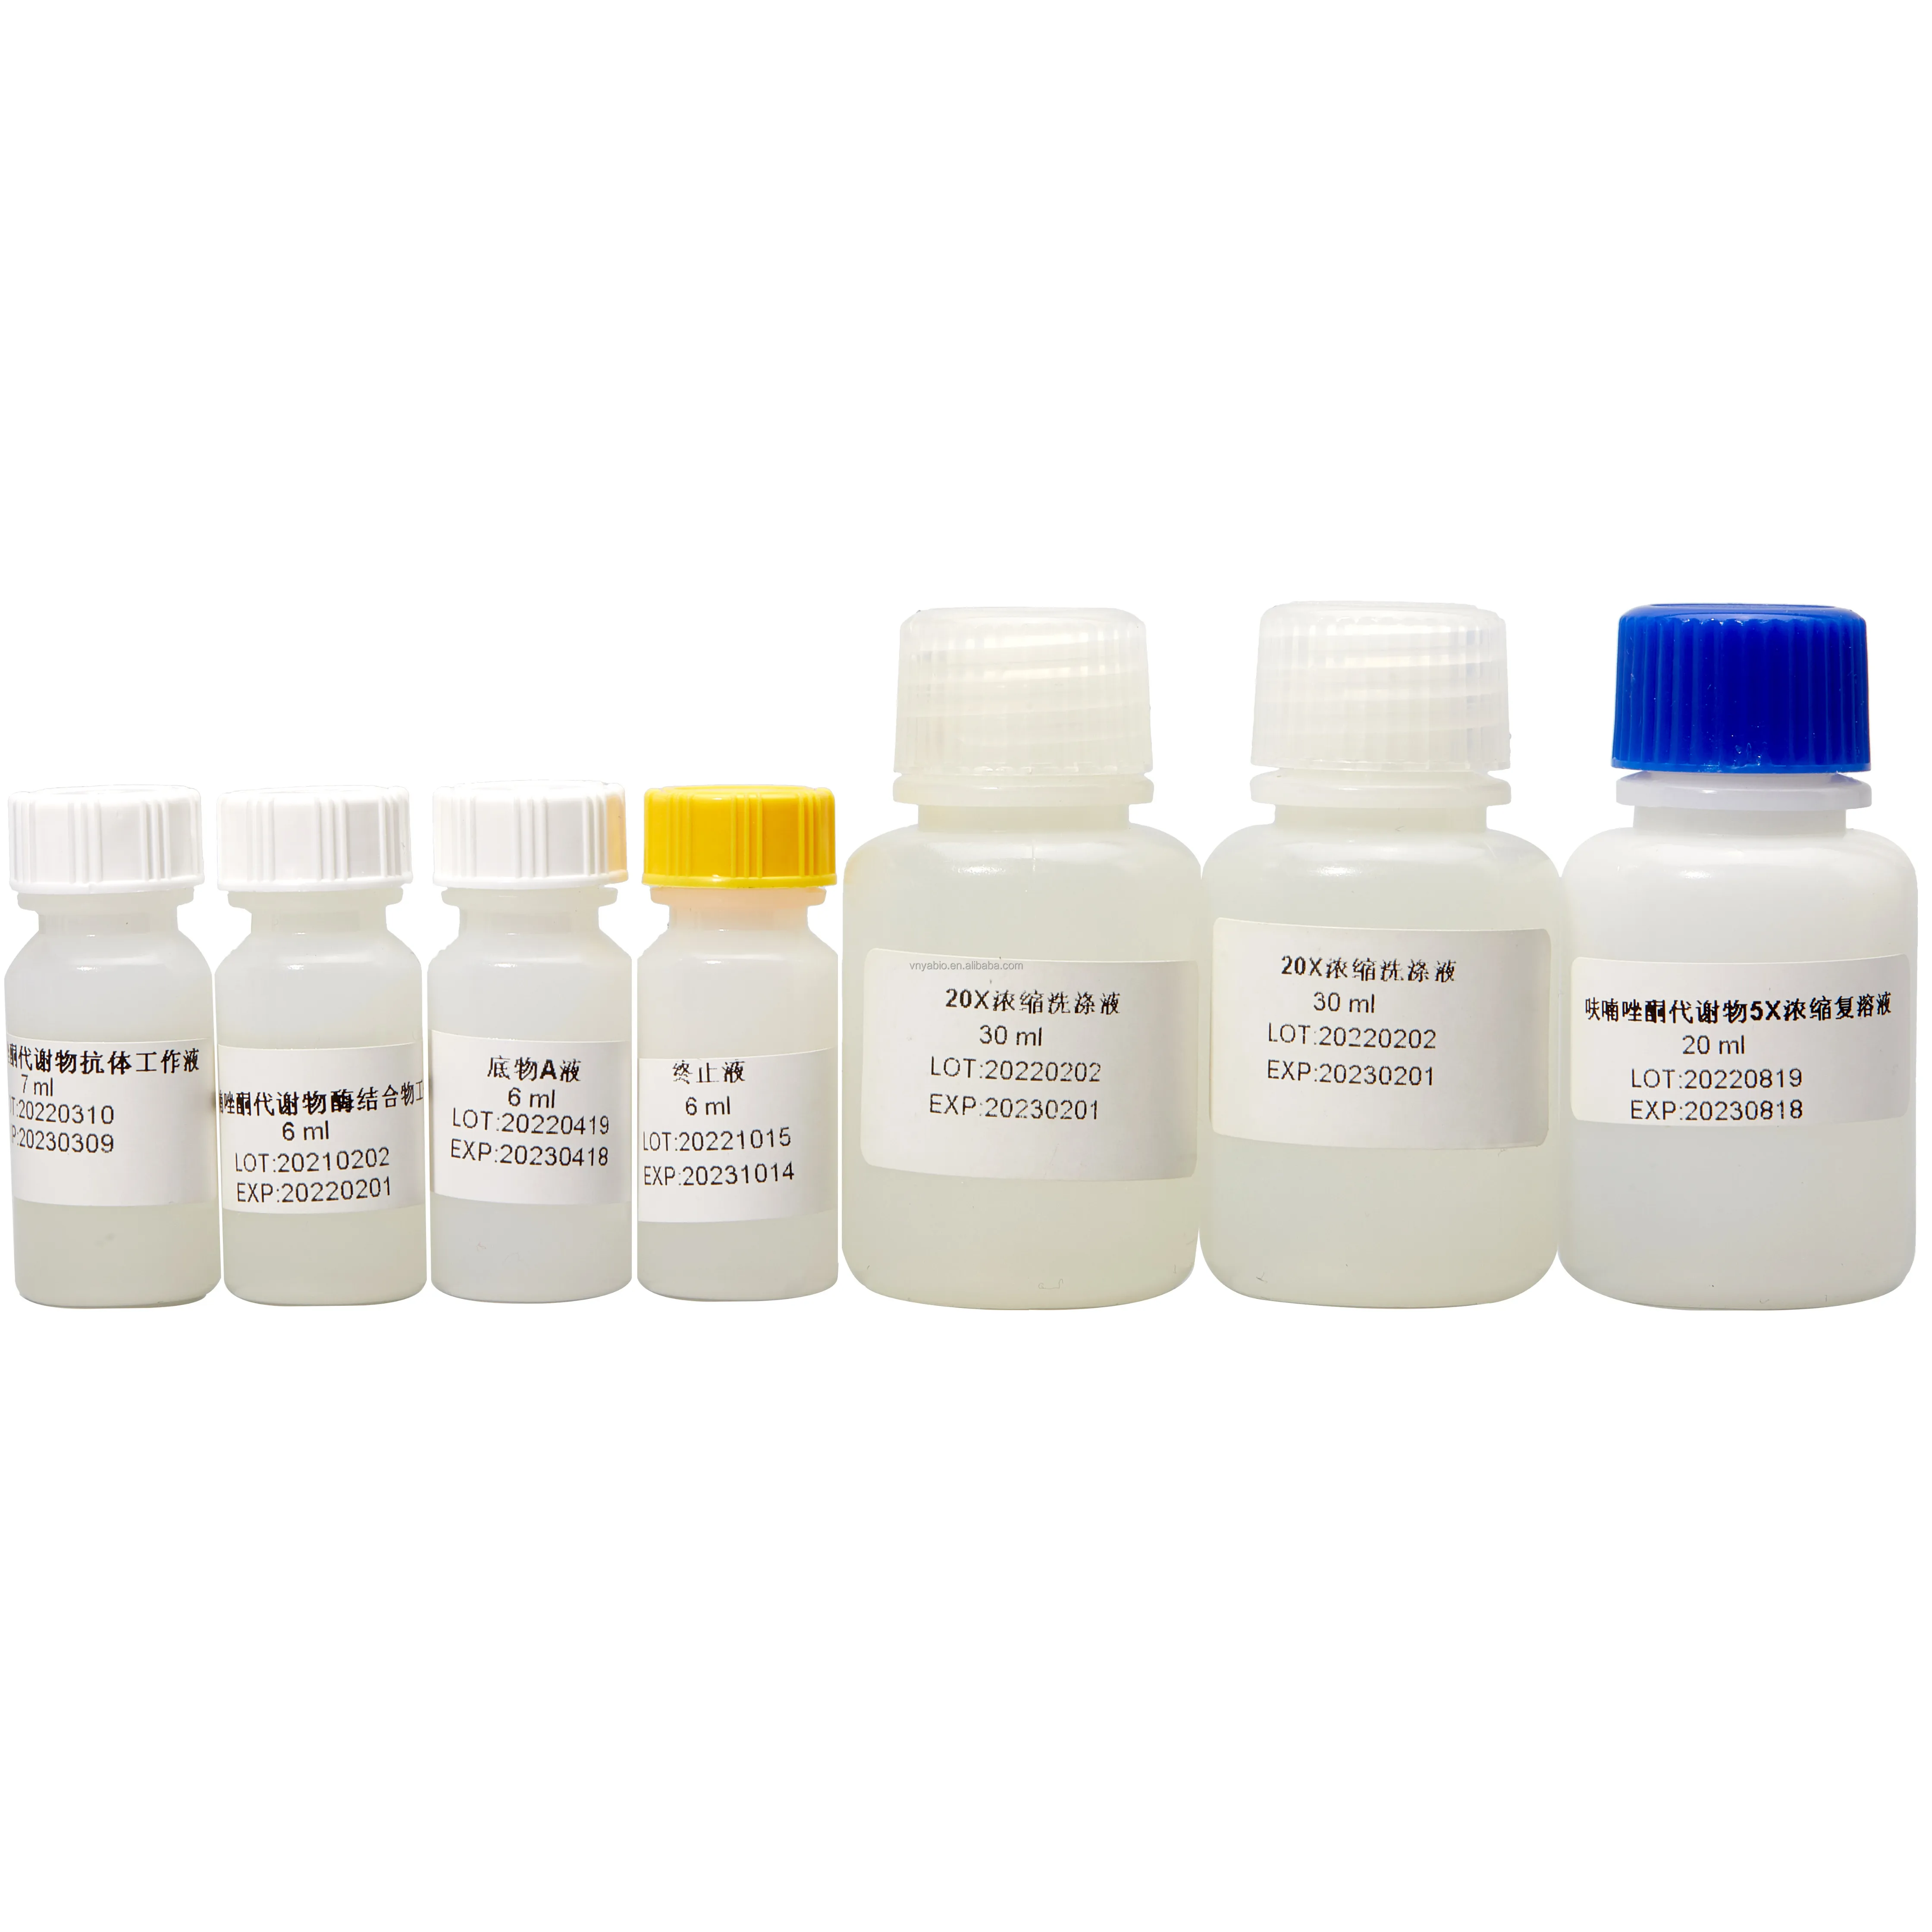 Furazolidone Detection Kit Sale in all the world Antibiotic Test kit ELISA test from Shandong,China